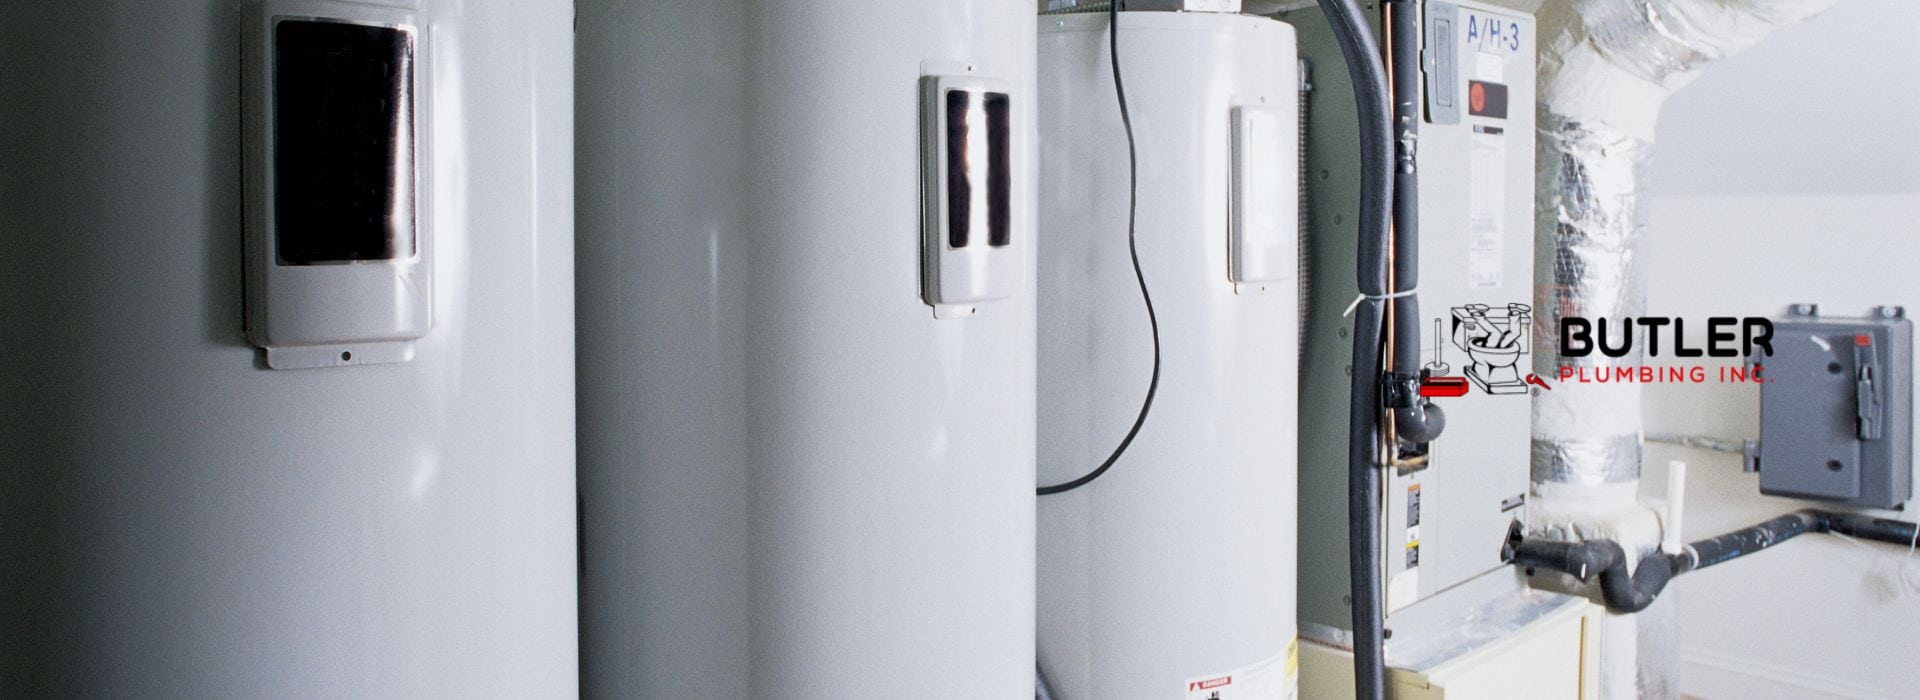 How Long Should a Water Heater Last